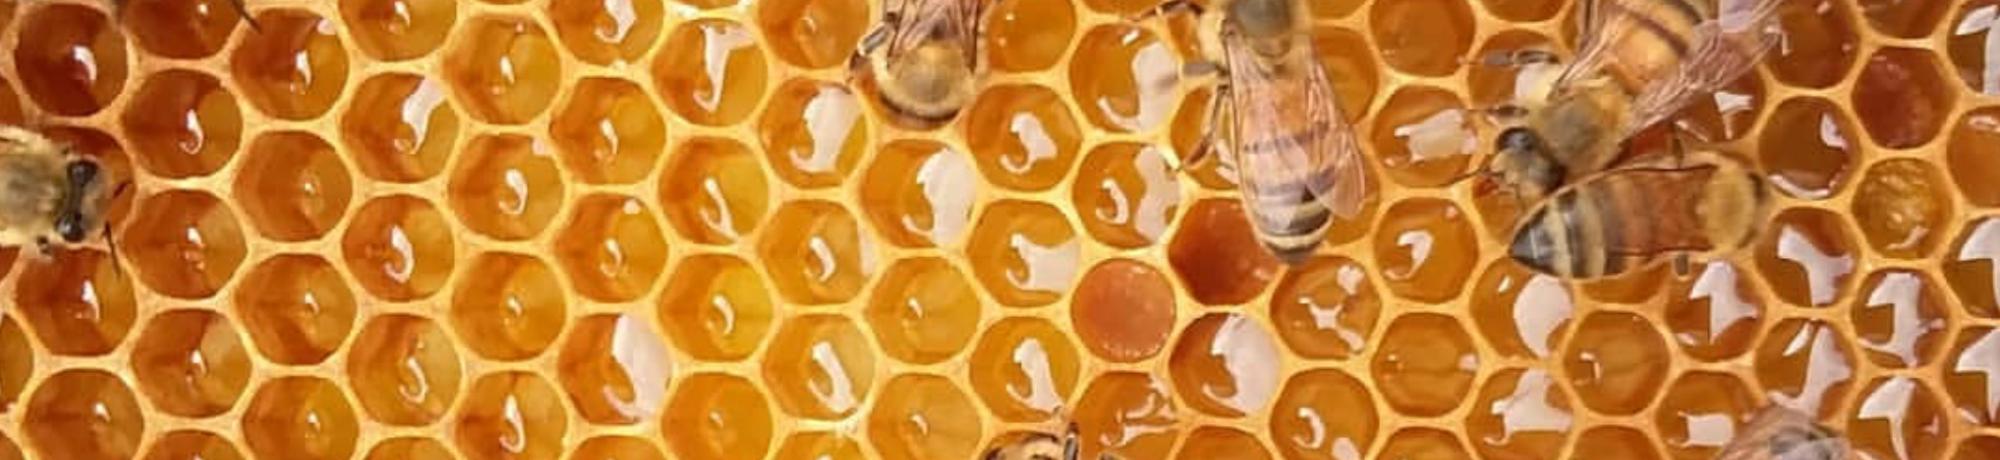 Bees on cells of honey